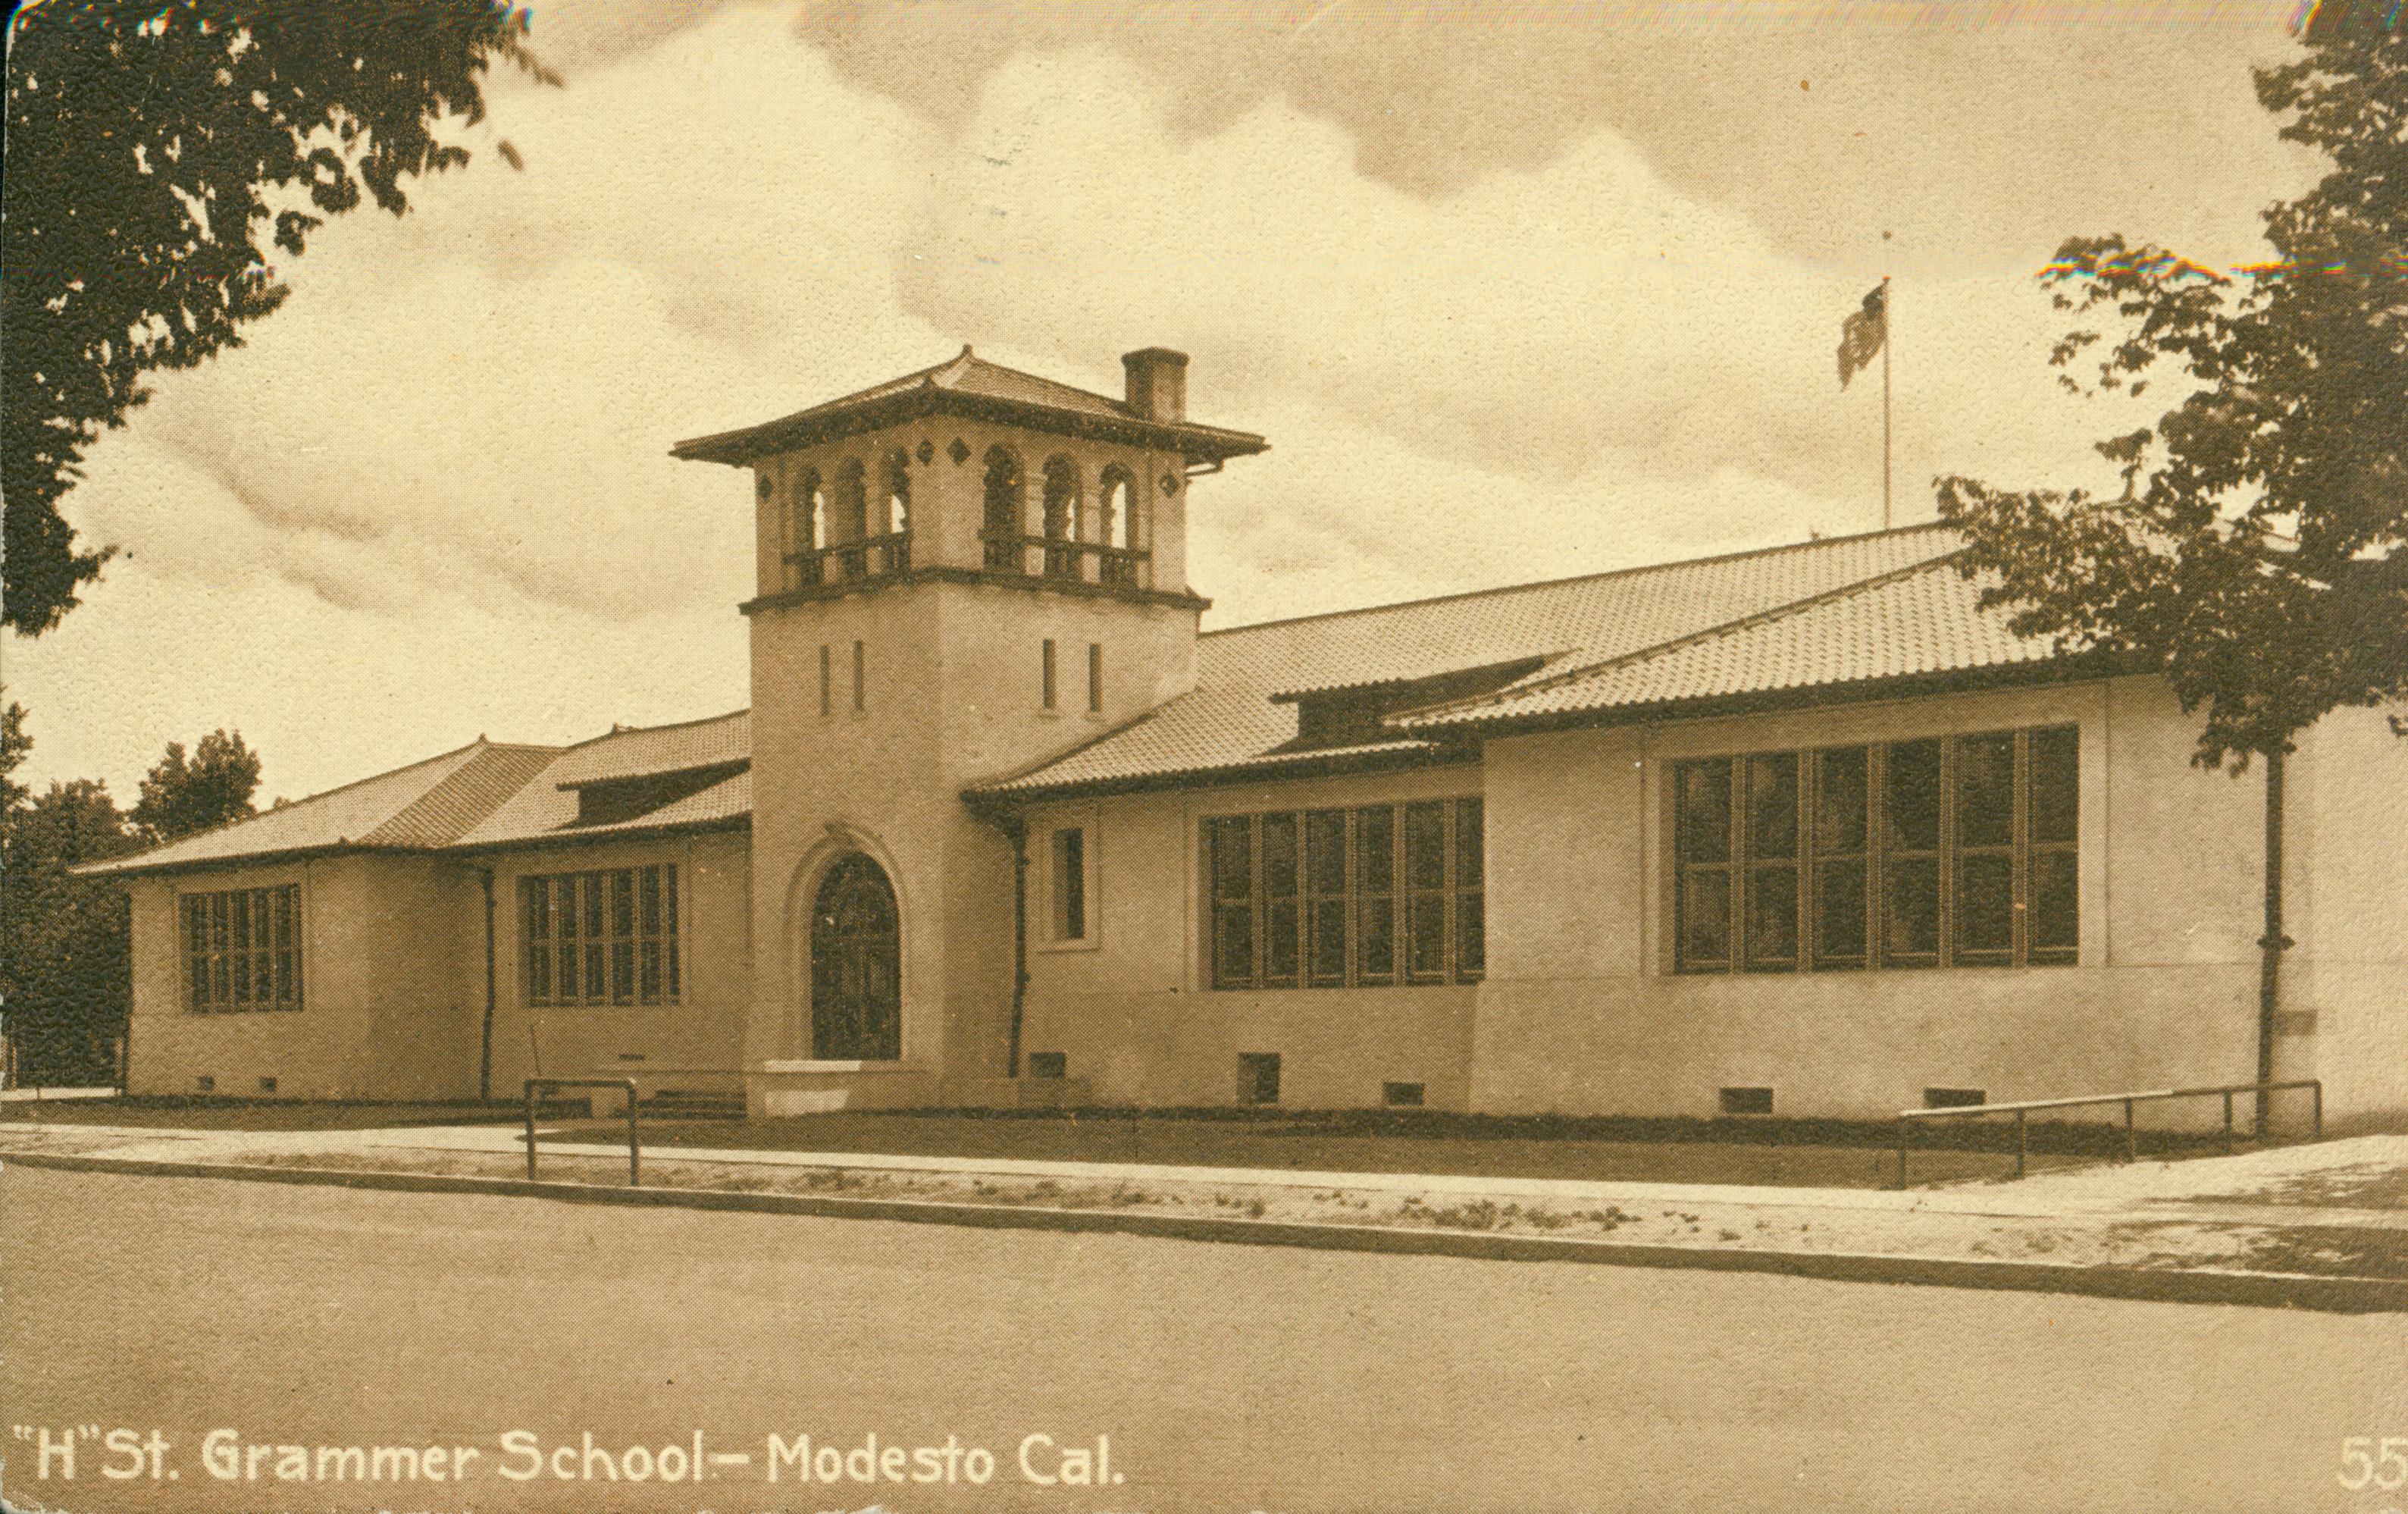 Shows a frontal view of 'H' St. Grammar School in Modesto